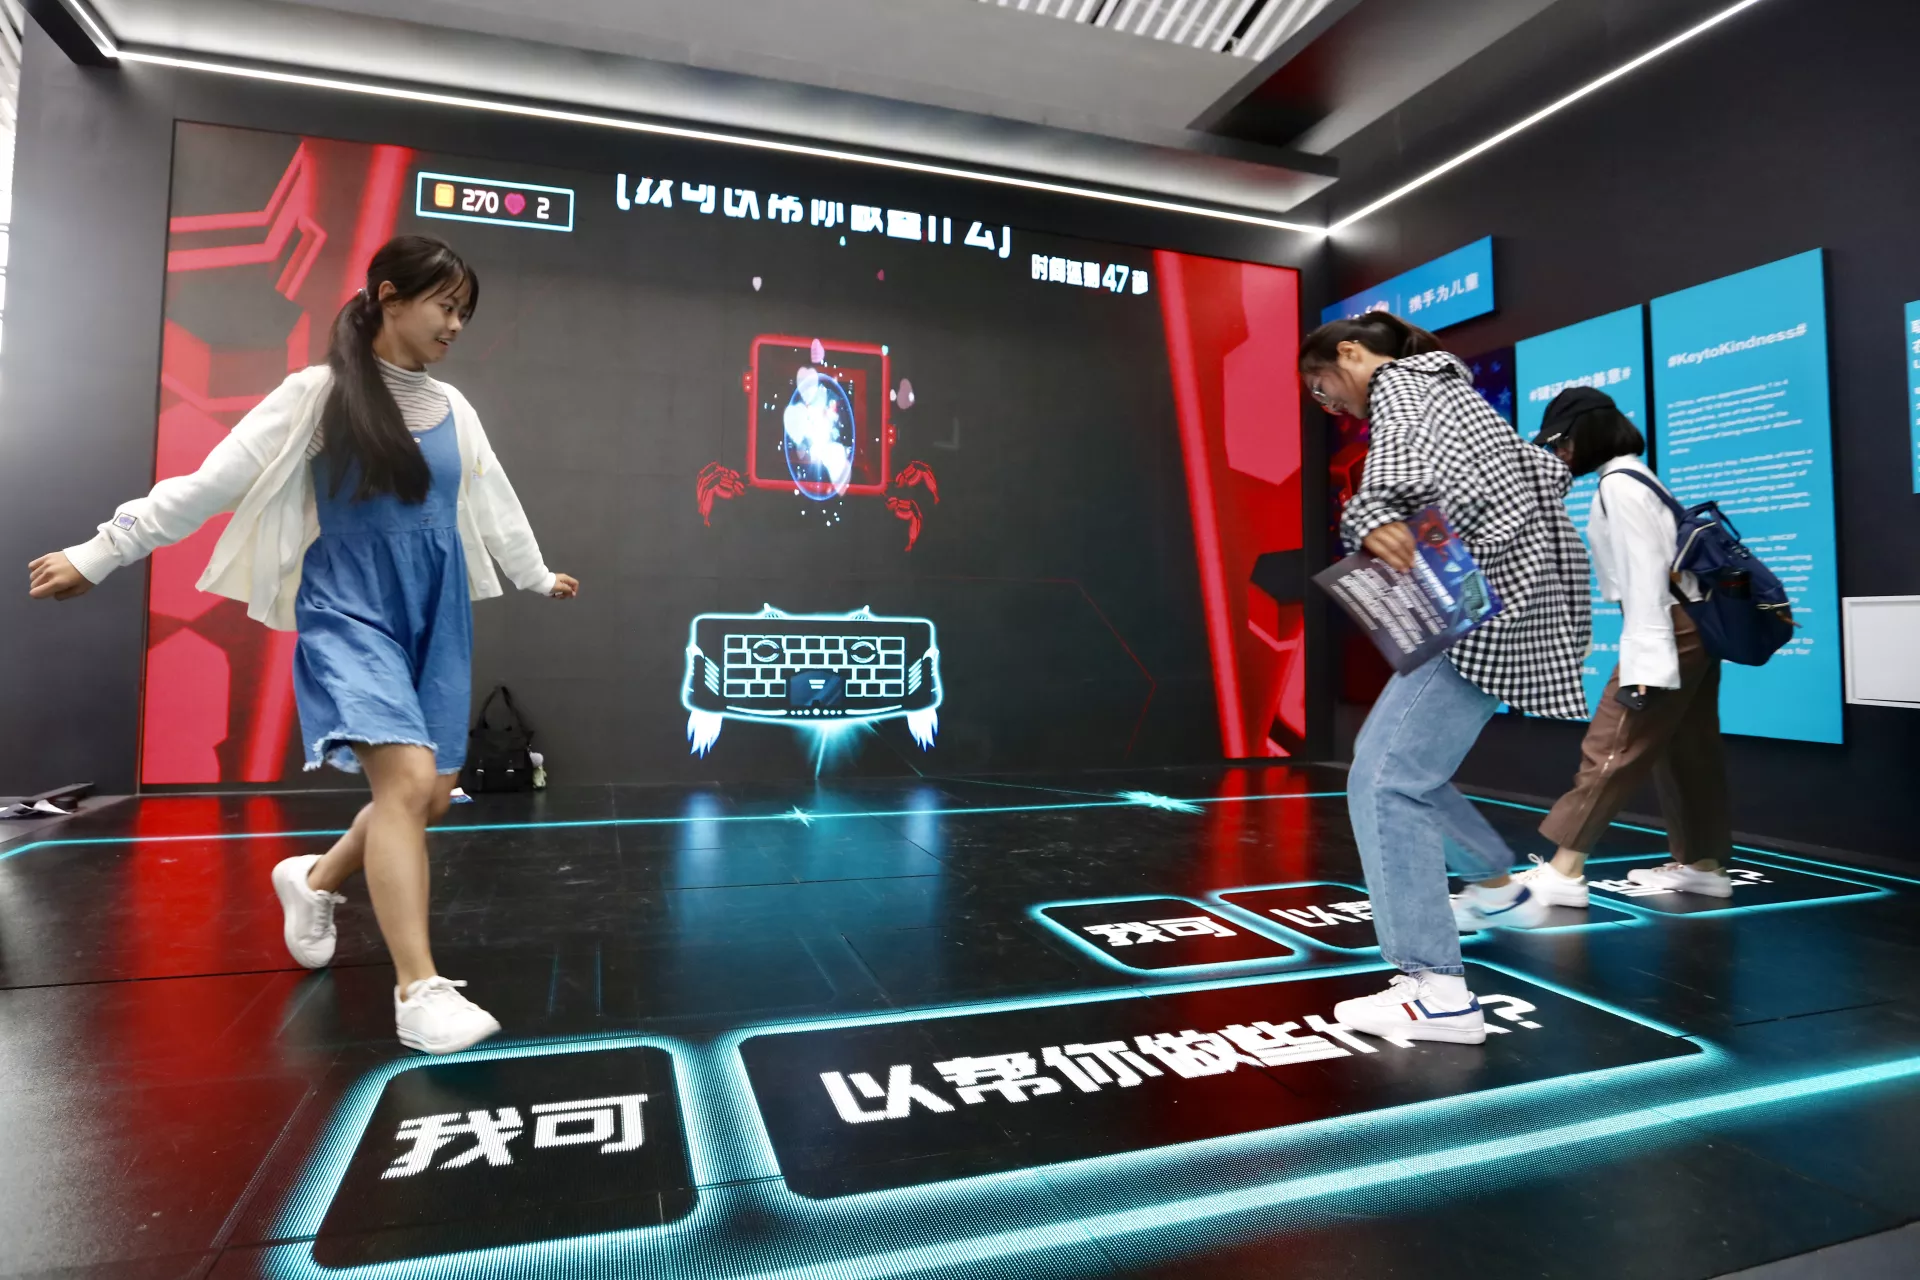 UNICEF‘s 'Key to Kindness' campaign launches at Wuzhen Global Internet Expo, demonstrating how cyberbullying can be overcome with kindness on 18 October 2019.